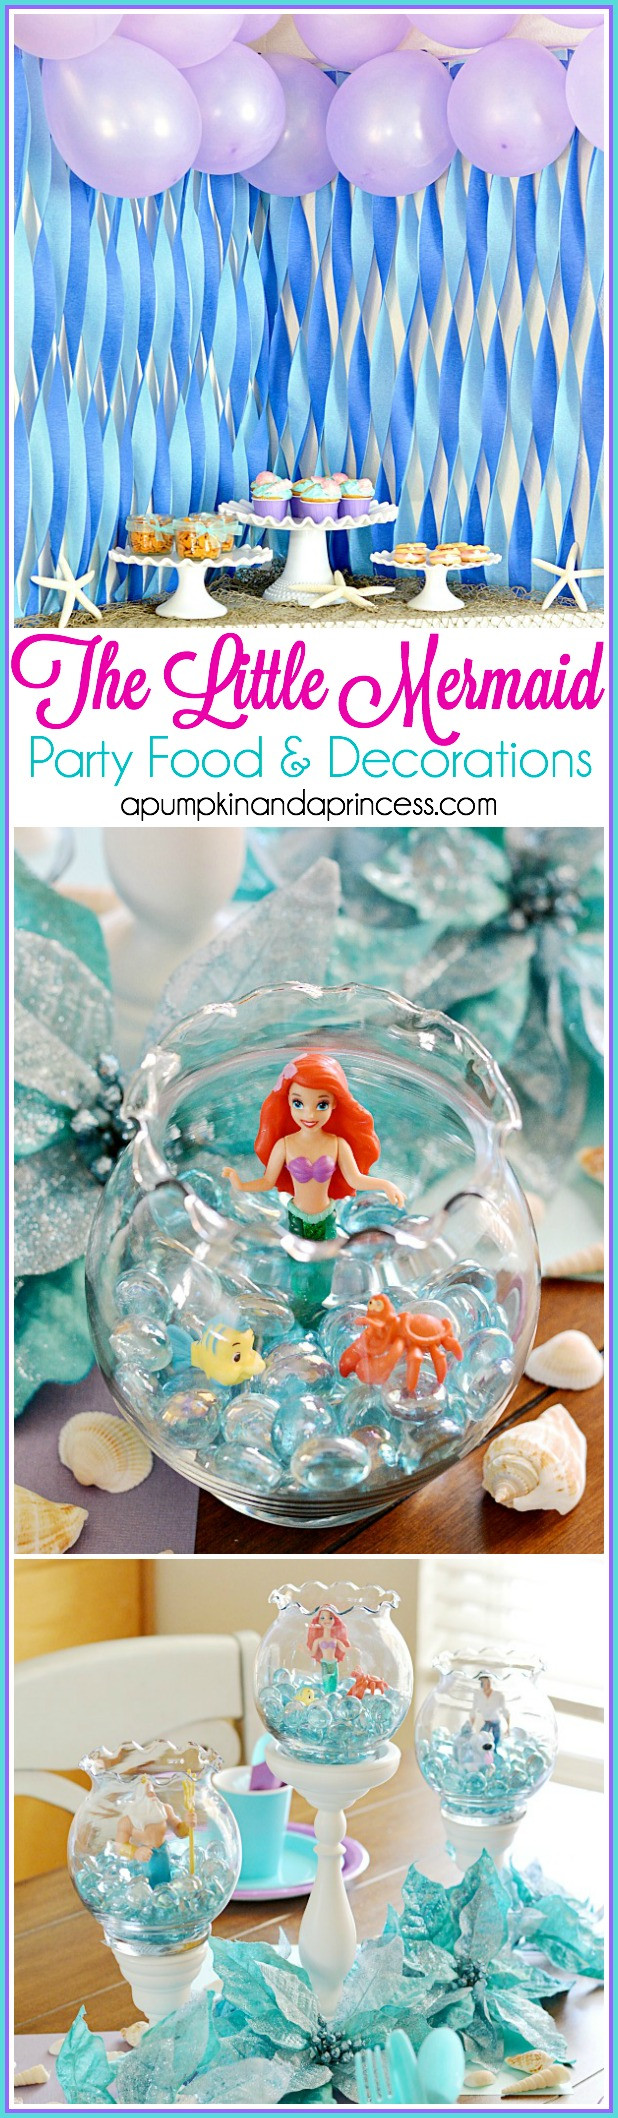 Little Mermaid Party Decoration Ideas
 The Little Mermaid Party A Pumpkin And A Princess